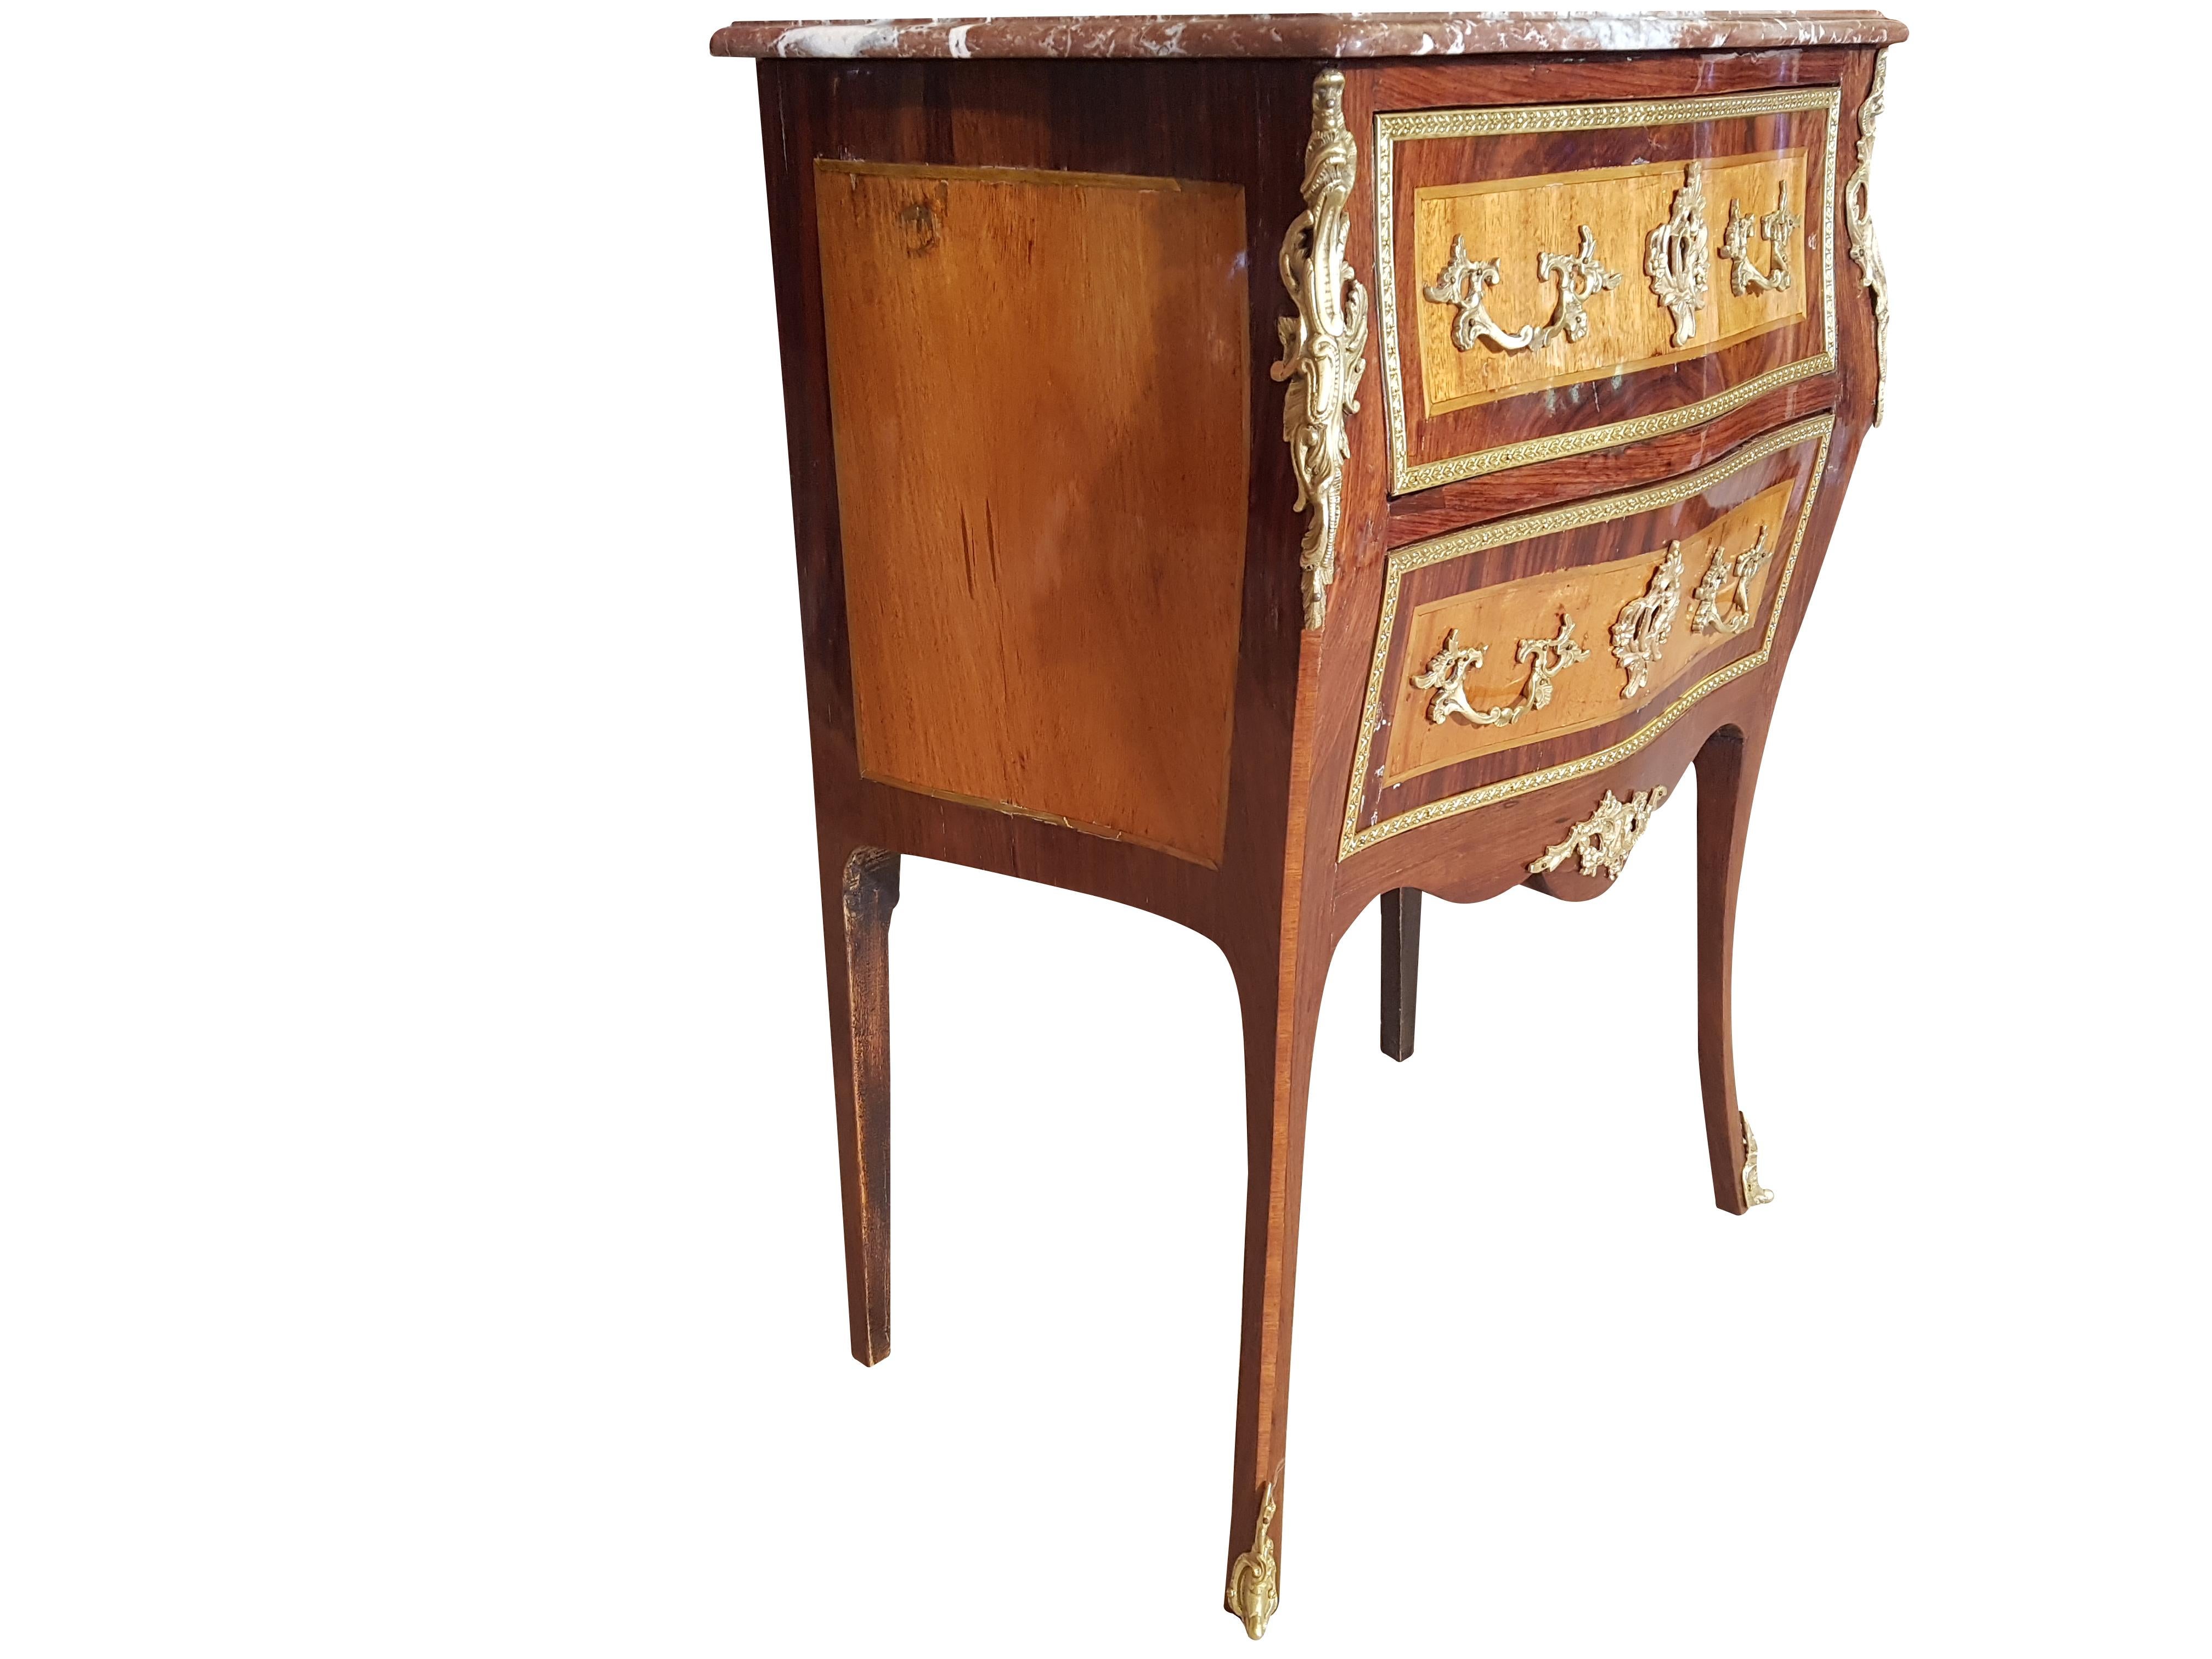 This rare, small commode from France manufactured in the second half of the 19th century, was carefully restored preserving the patina, missing keys were made, the shellac surface was renewed and polished and missing brass strips were renewed. The